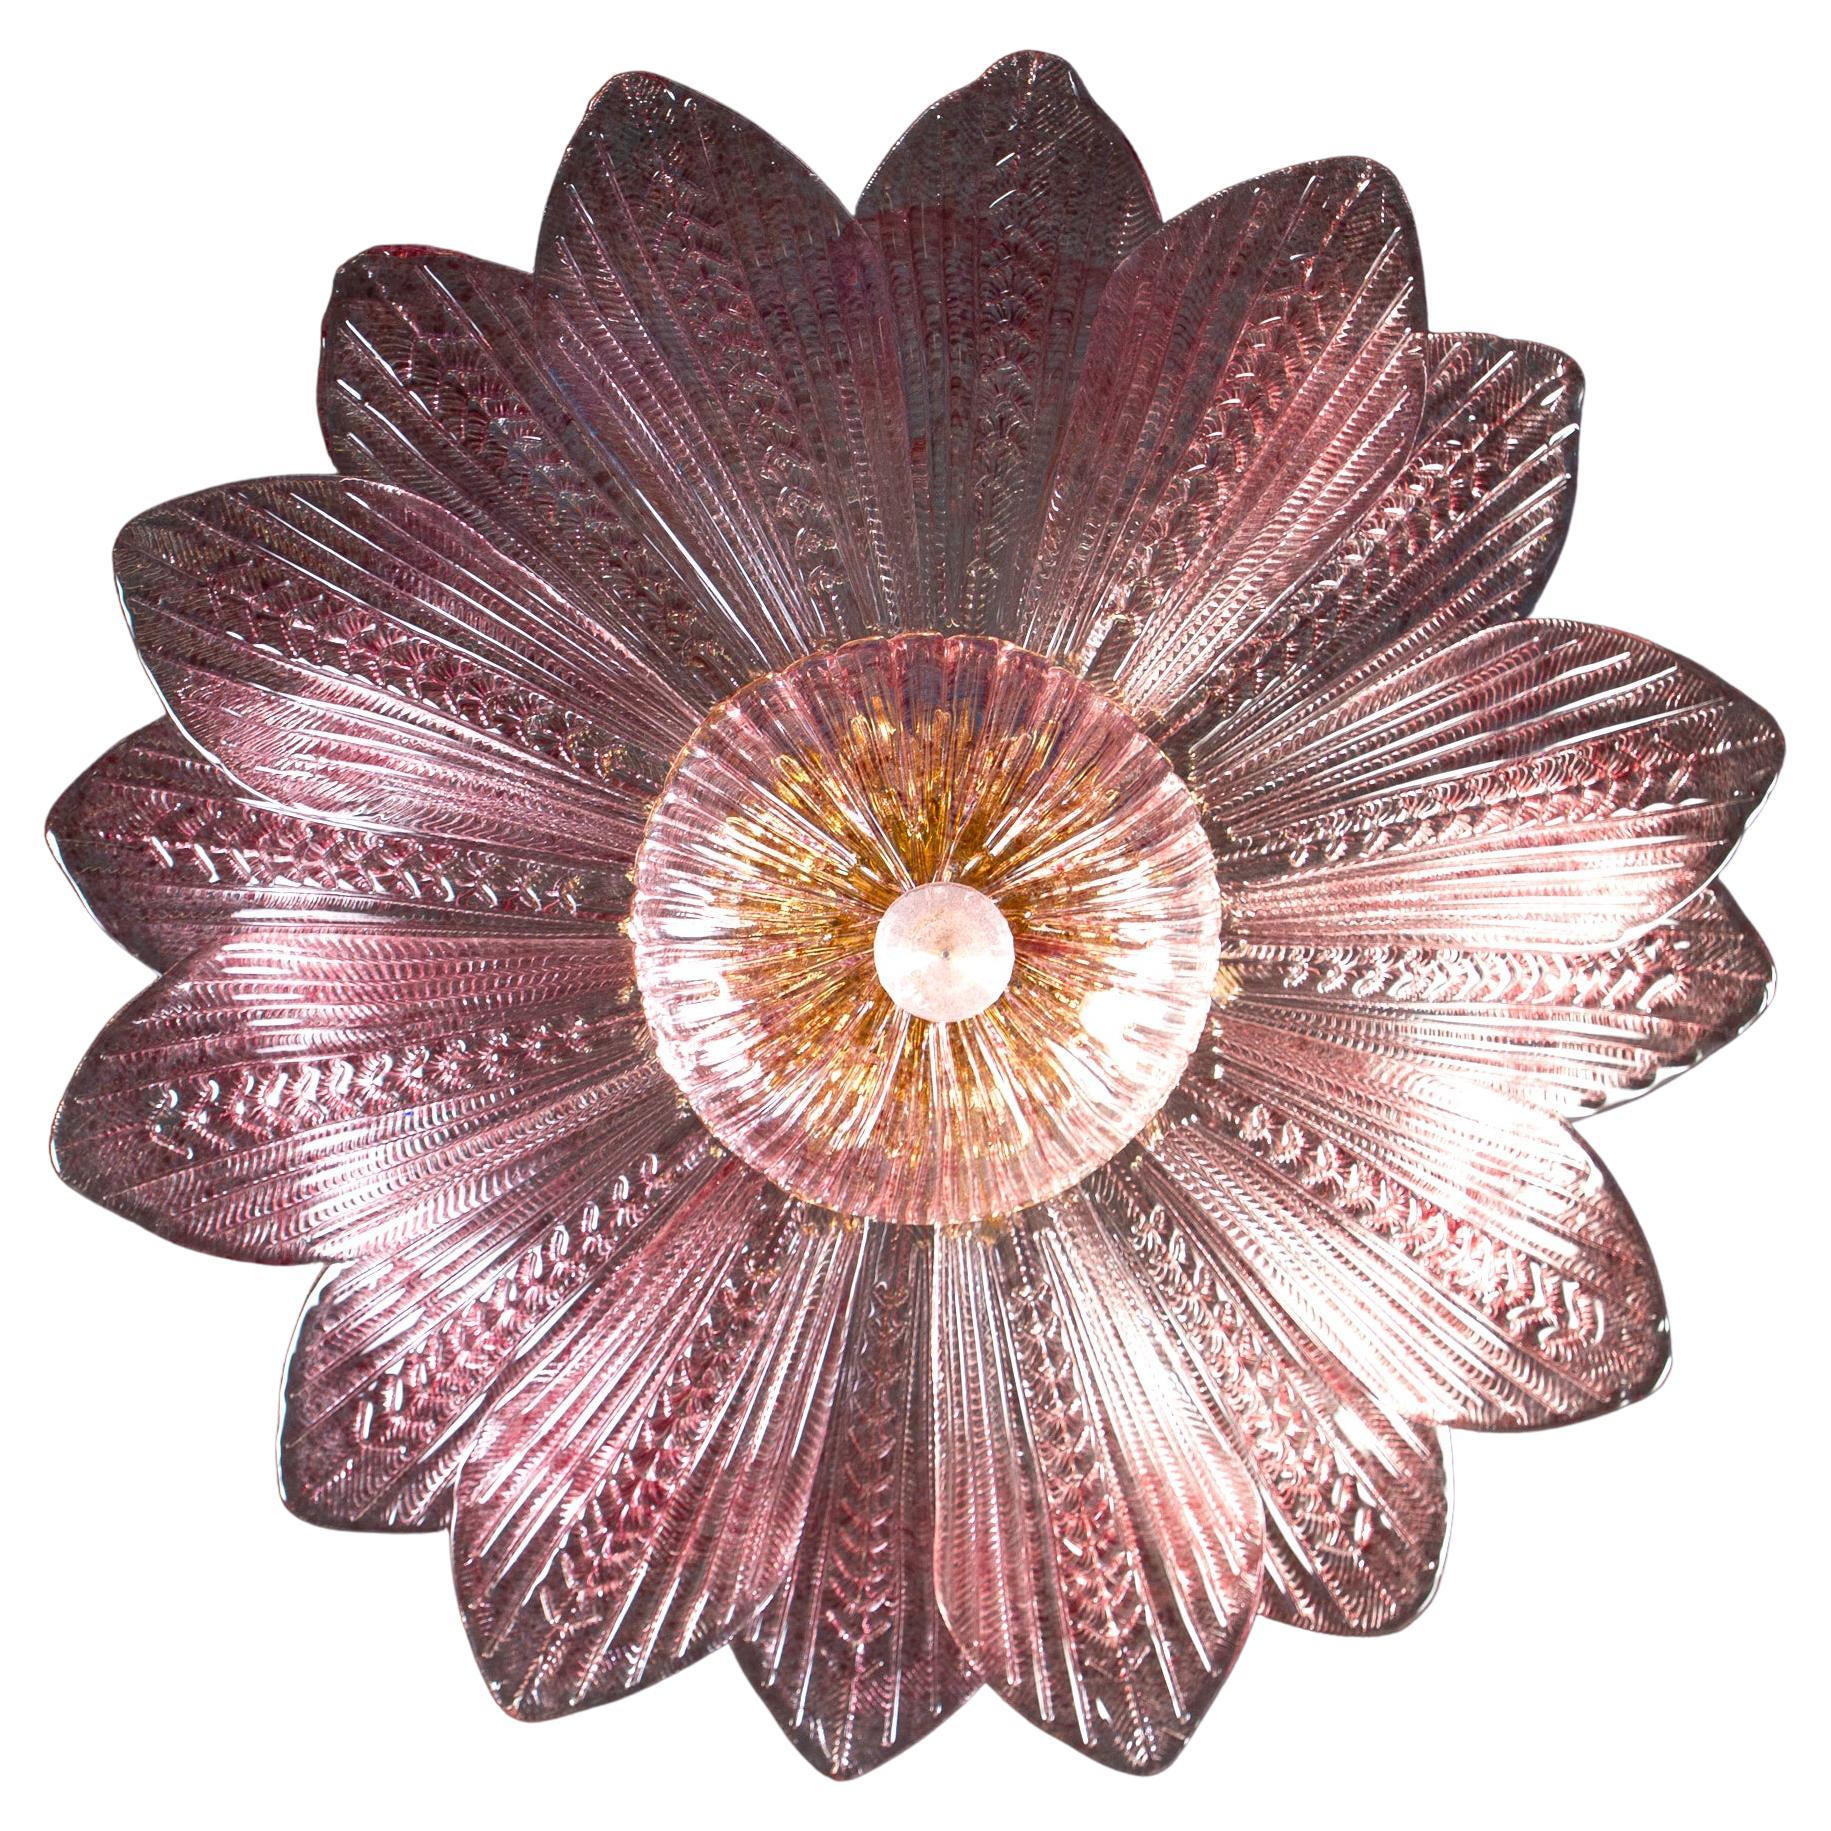 Italian Charming Pink Amethyst Murano Glass Leave Ceiling Light or Chandelier